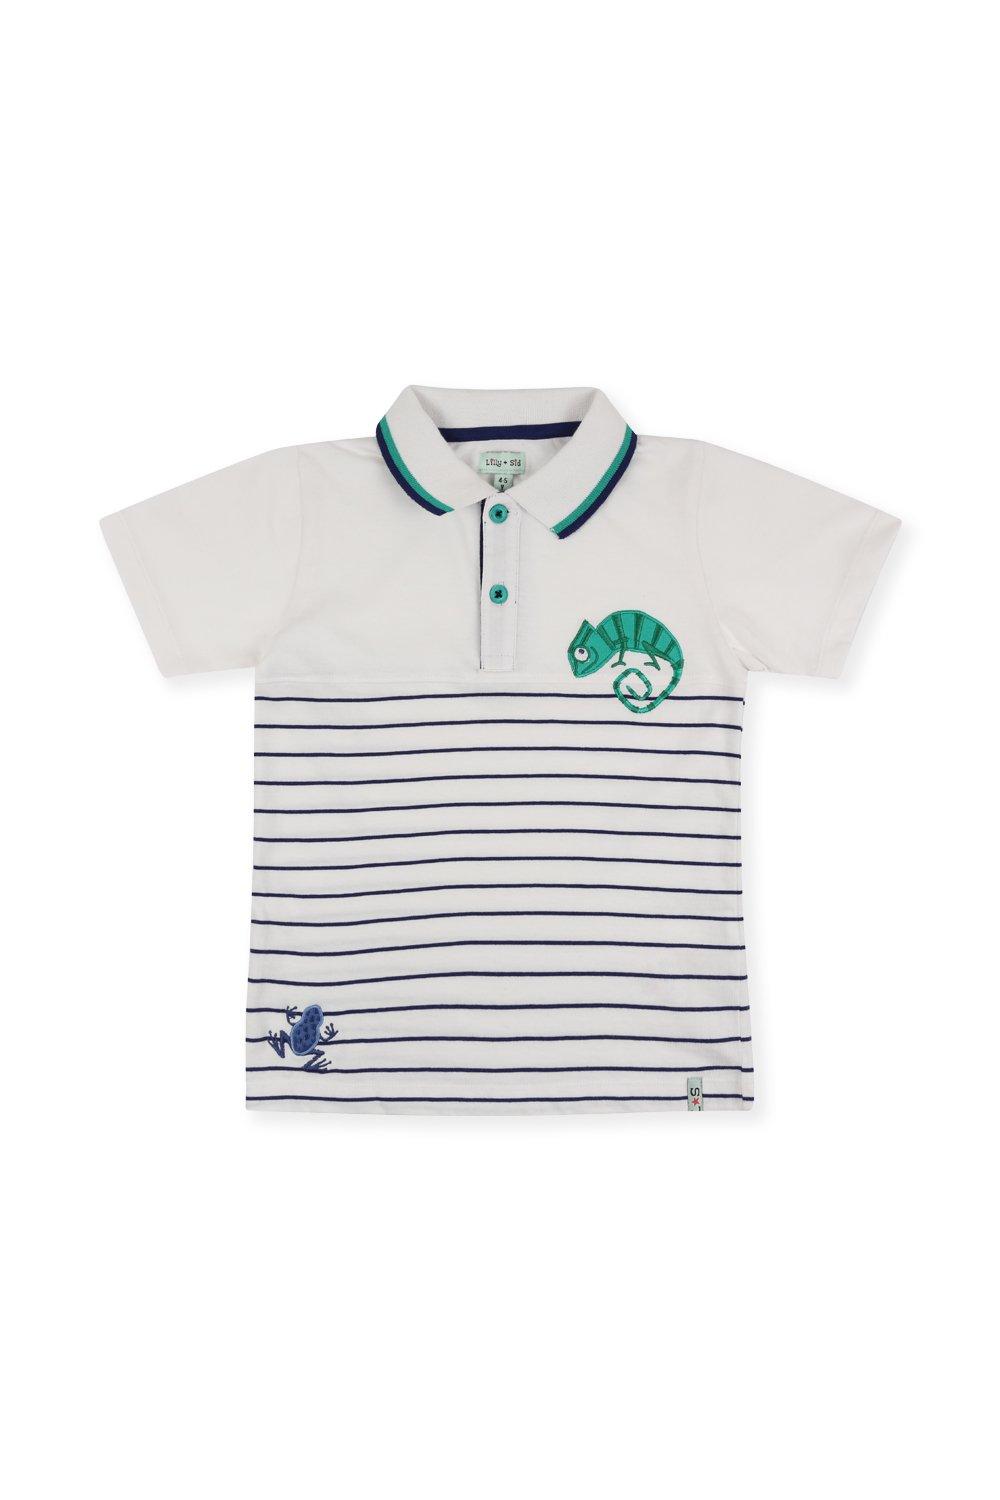 Embroidered Creatures Poloshirt